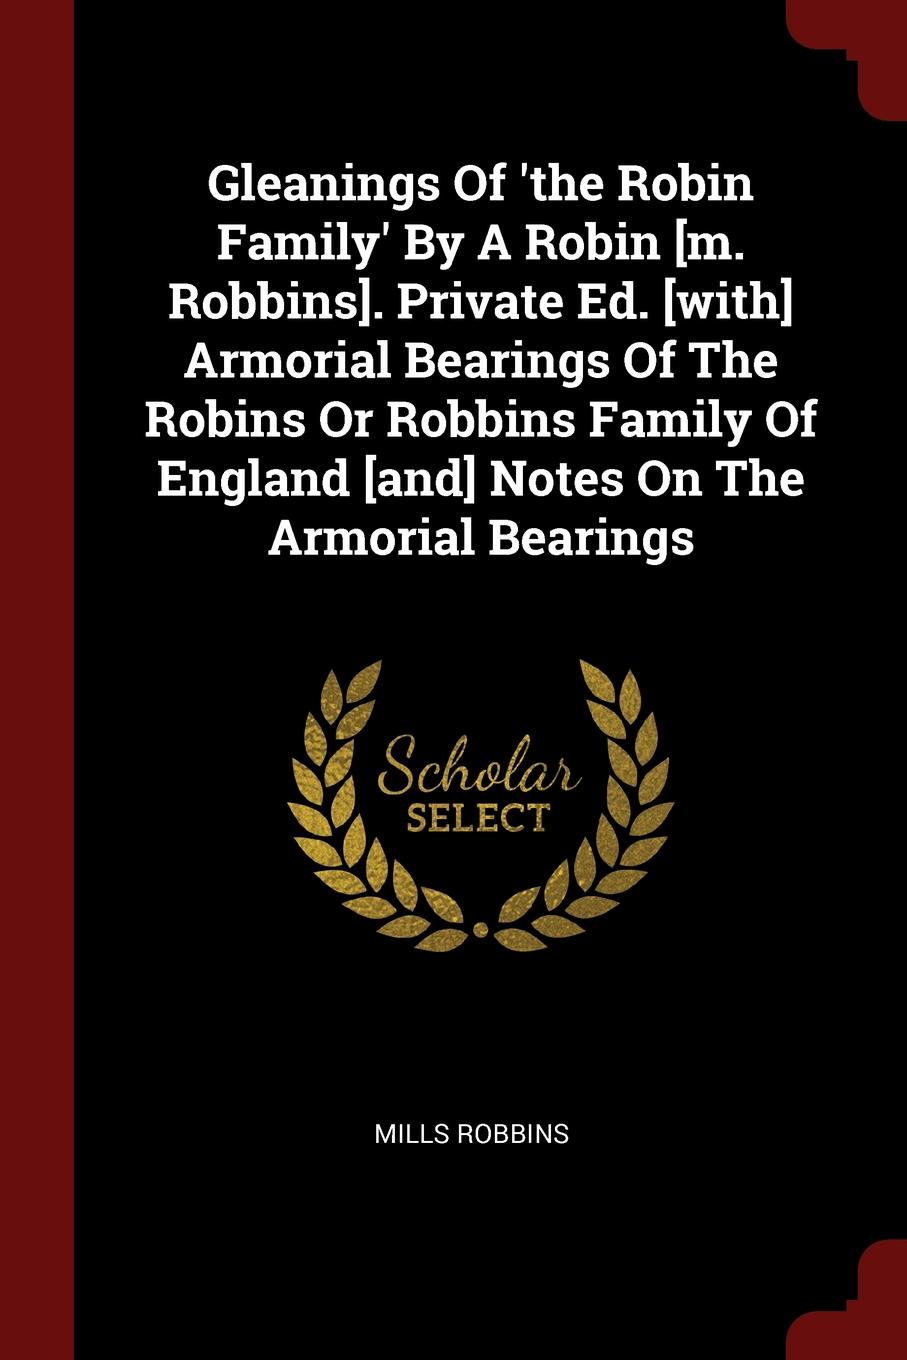 Gleanings Of .the Robin Family. By A Robin .m. Robbins.. Private Ed. .with. Armorial Bearings Of The Robins Or Robbins Family Of England .and. Notes On The Armorial Bearings